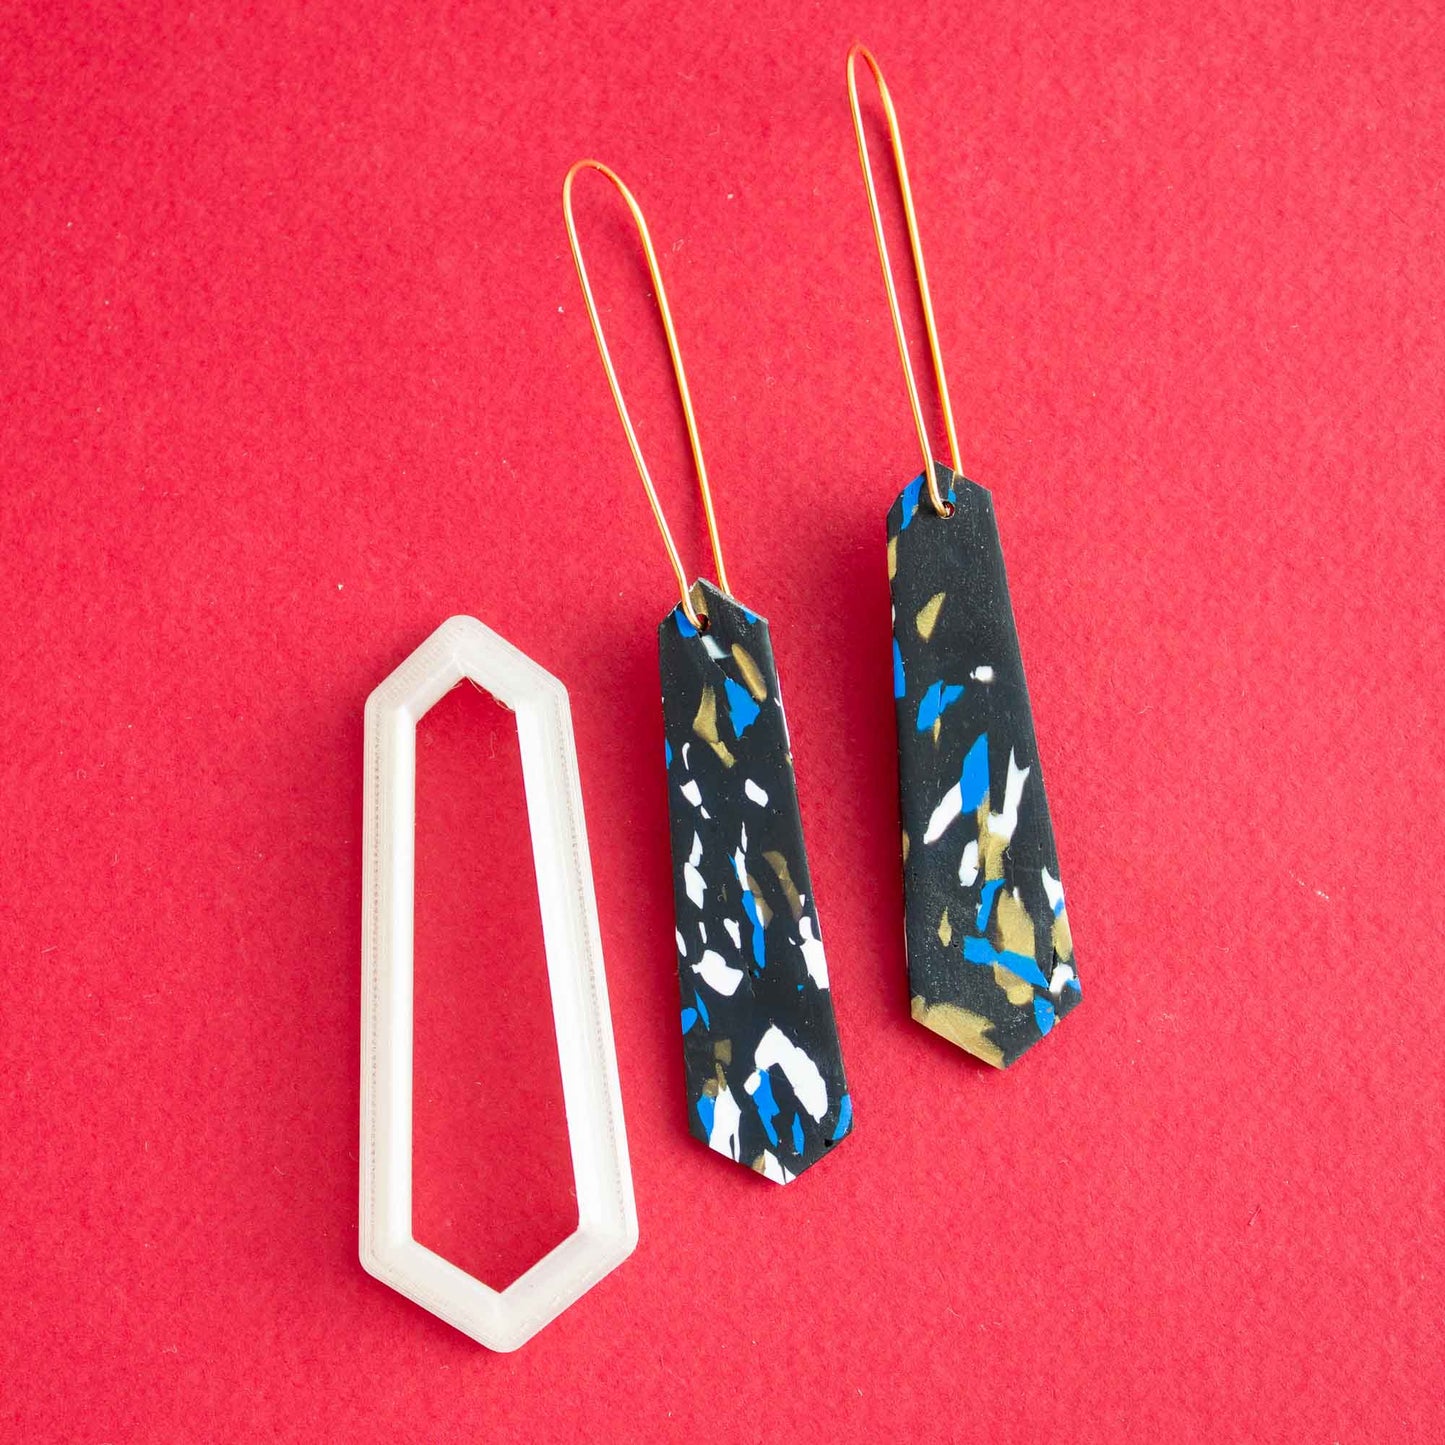 1 pair of long thin earrings next to a polymer clay cutter of the same shape on a red background